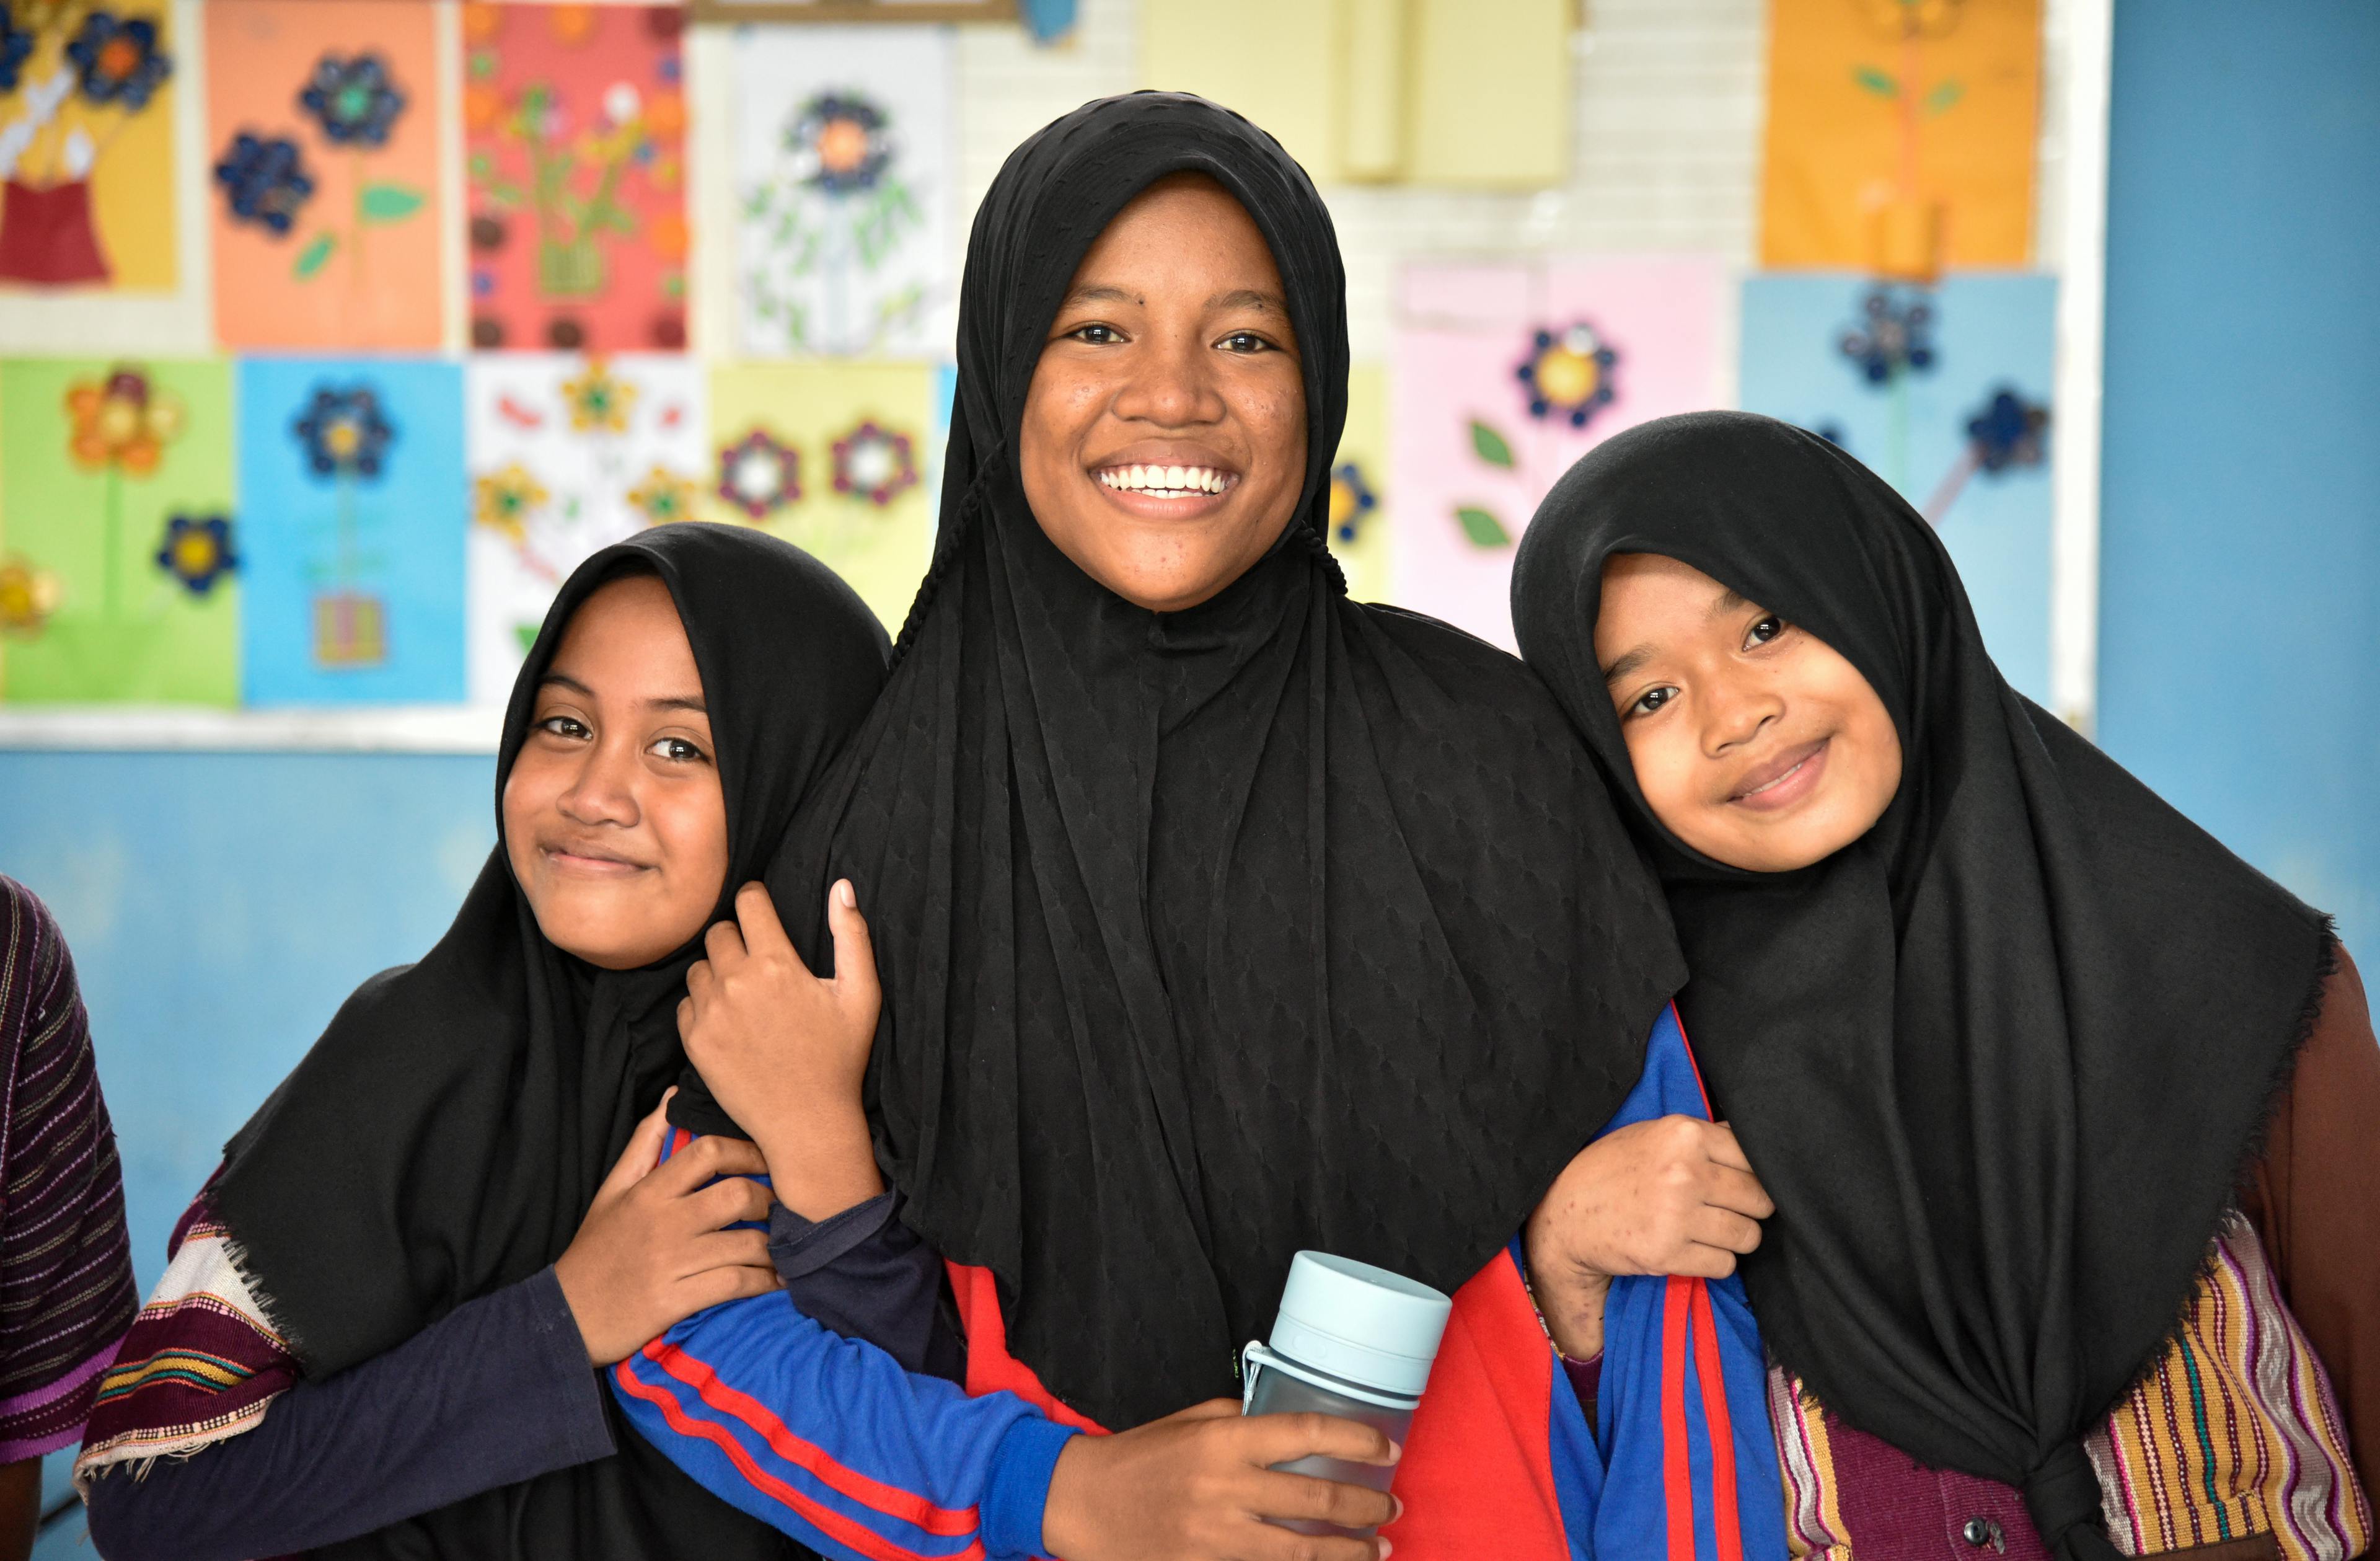 A group of girls from Kampung Baru Primary School in Larantukaafter, Indonesia after a discussion on menstrual hygiene inside their class using OkyApp, the first period tracker created by girls for girls in Indonesia.